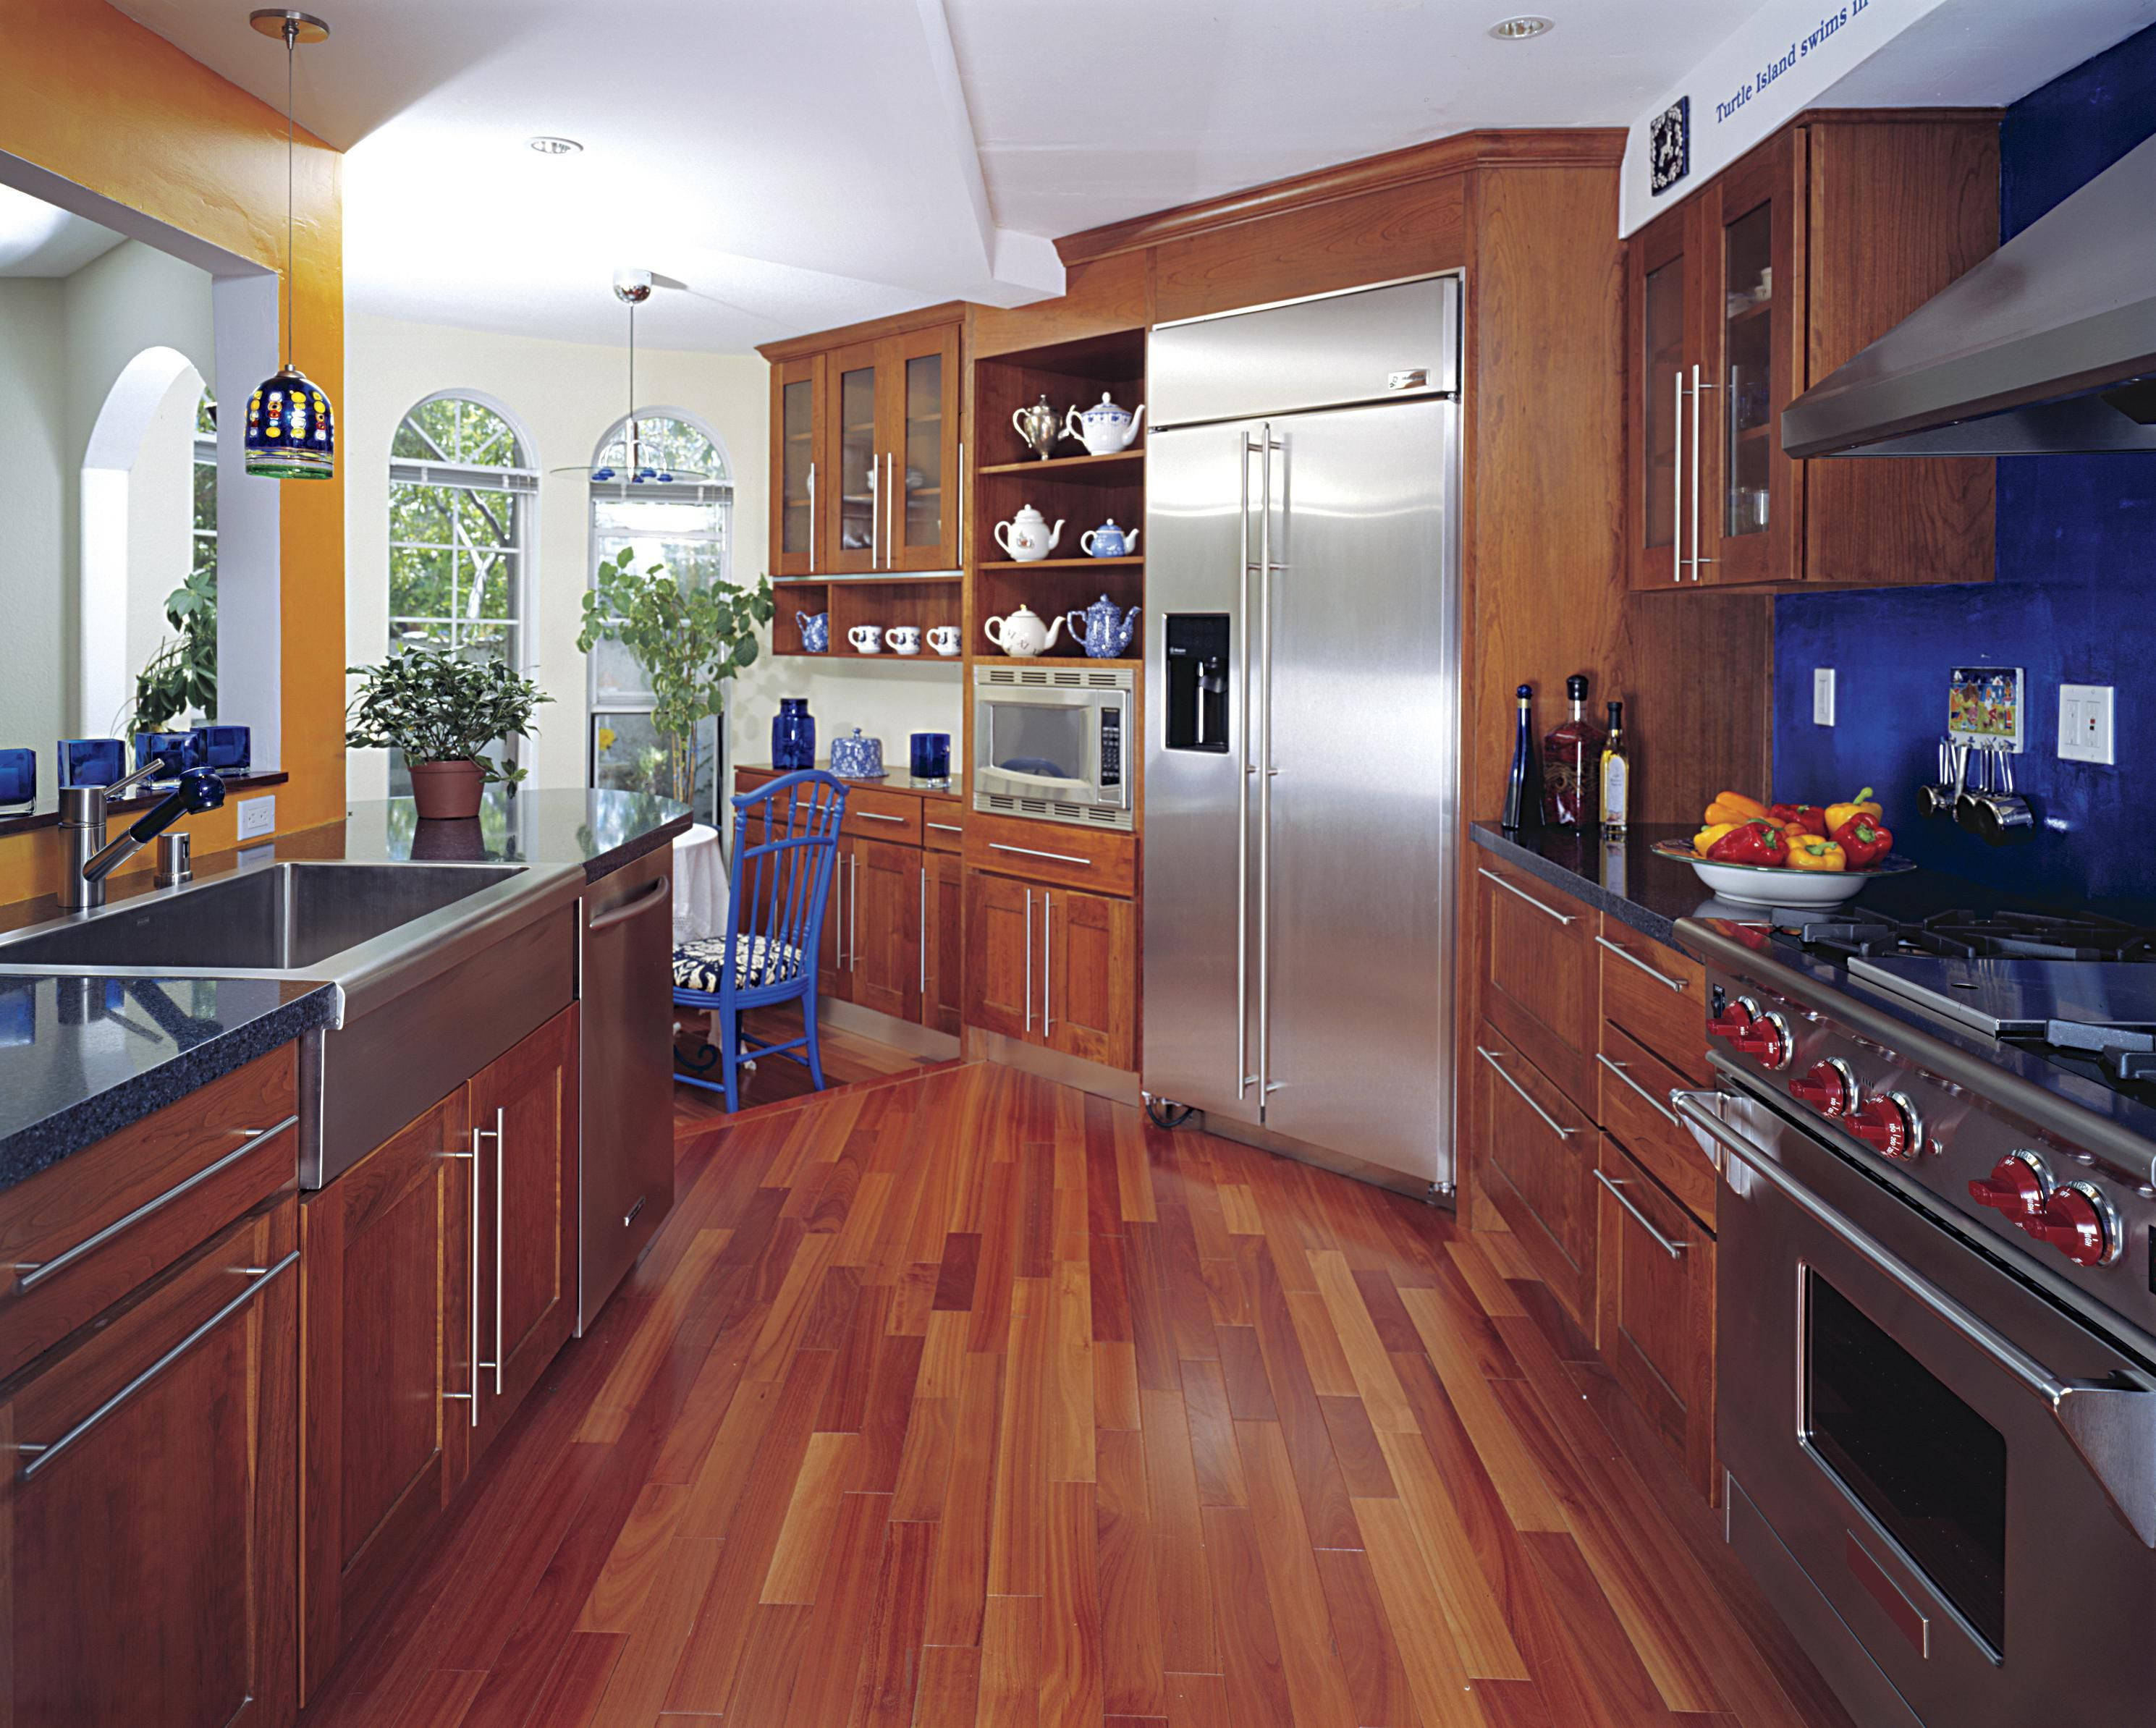 21 Wonderful 1 1 2 Inch Maple Hardwood Flooring 2024 free download 1 1 2 inch maple hardwood flooring of hardwood floor in a kitchen is this allowed pertaining to 186828472 56a49f3a5f9b58b7d0d7e142